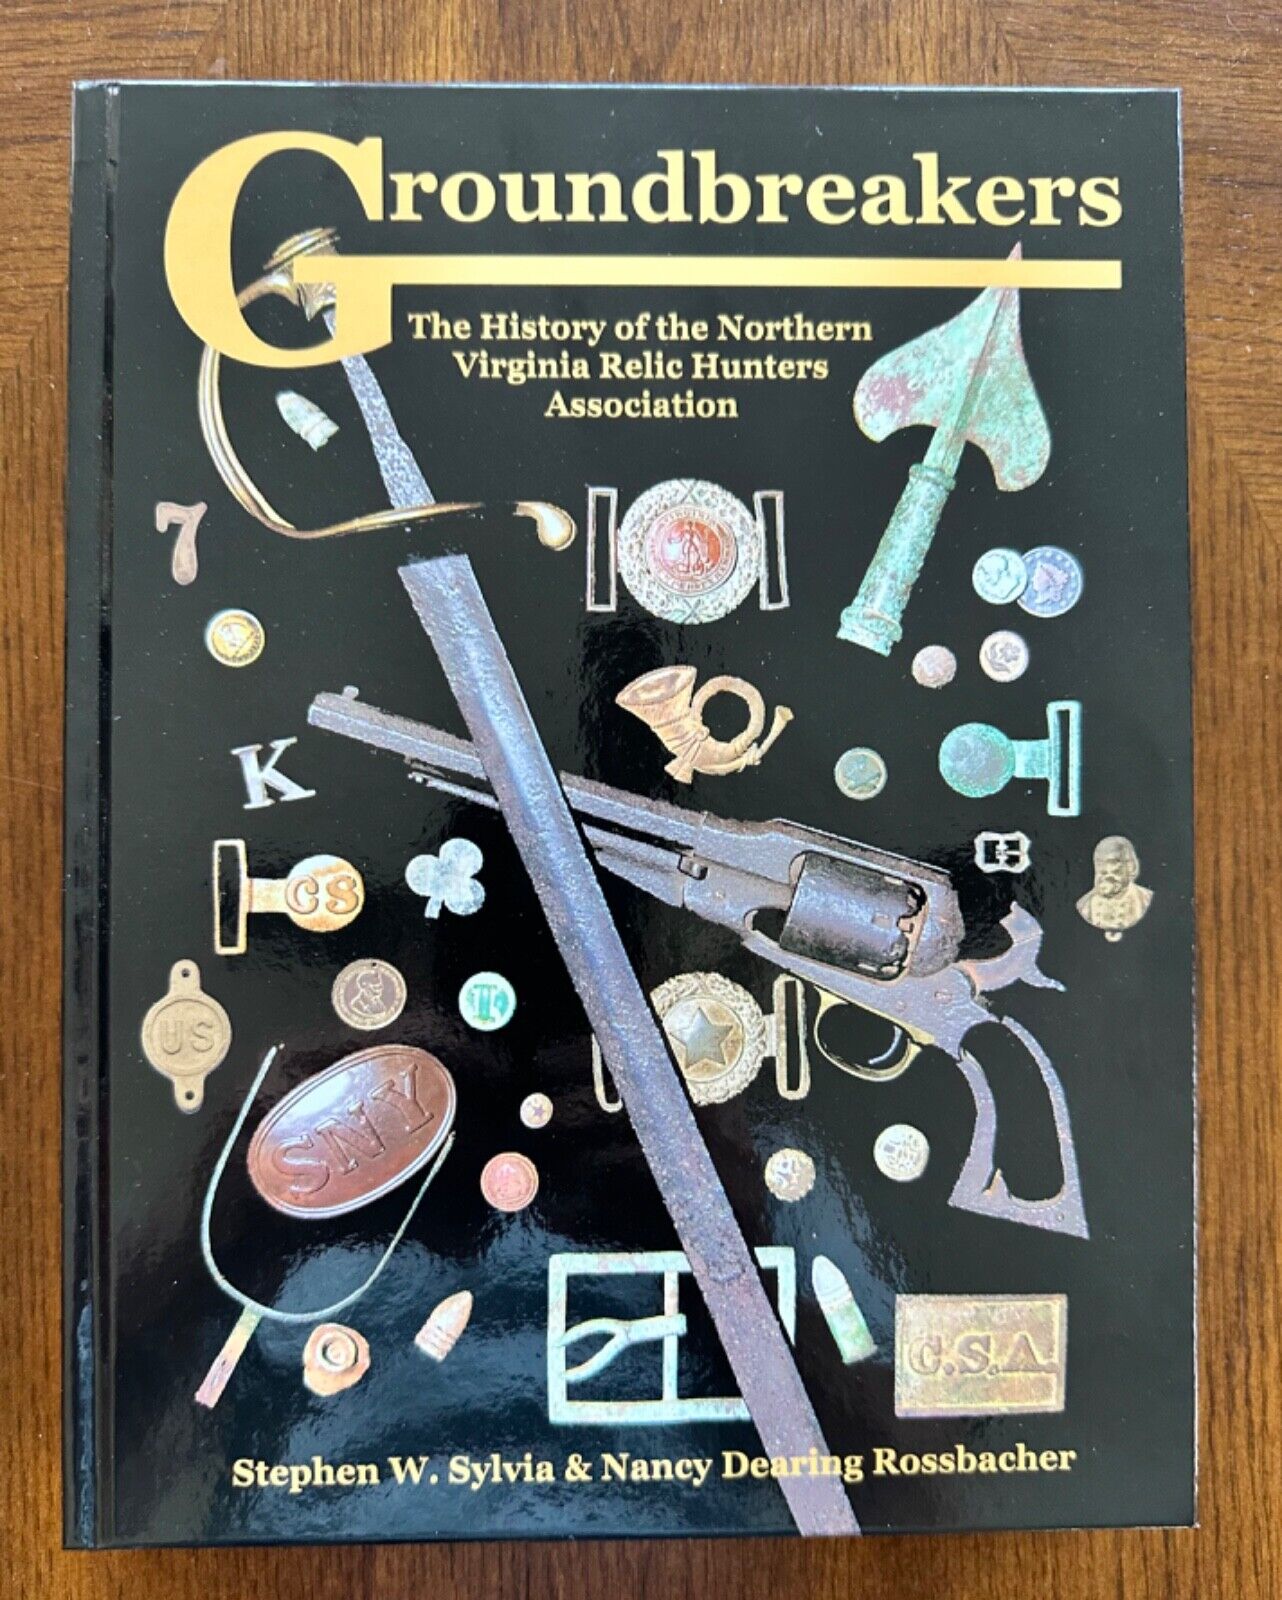 “Groundbreakers, The History of The Northern Virginia Relic Hunters Association”